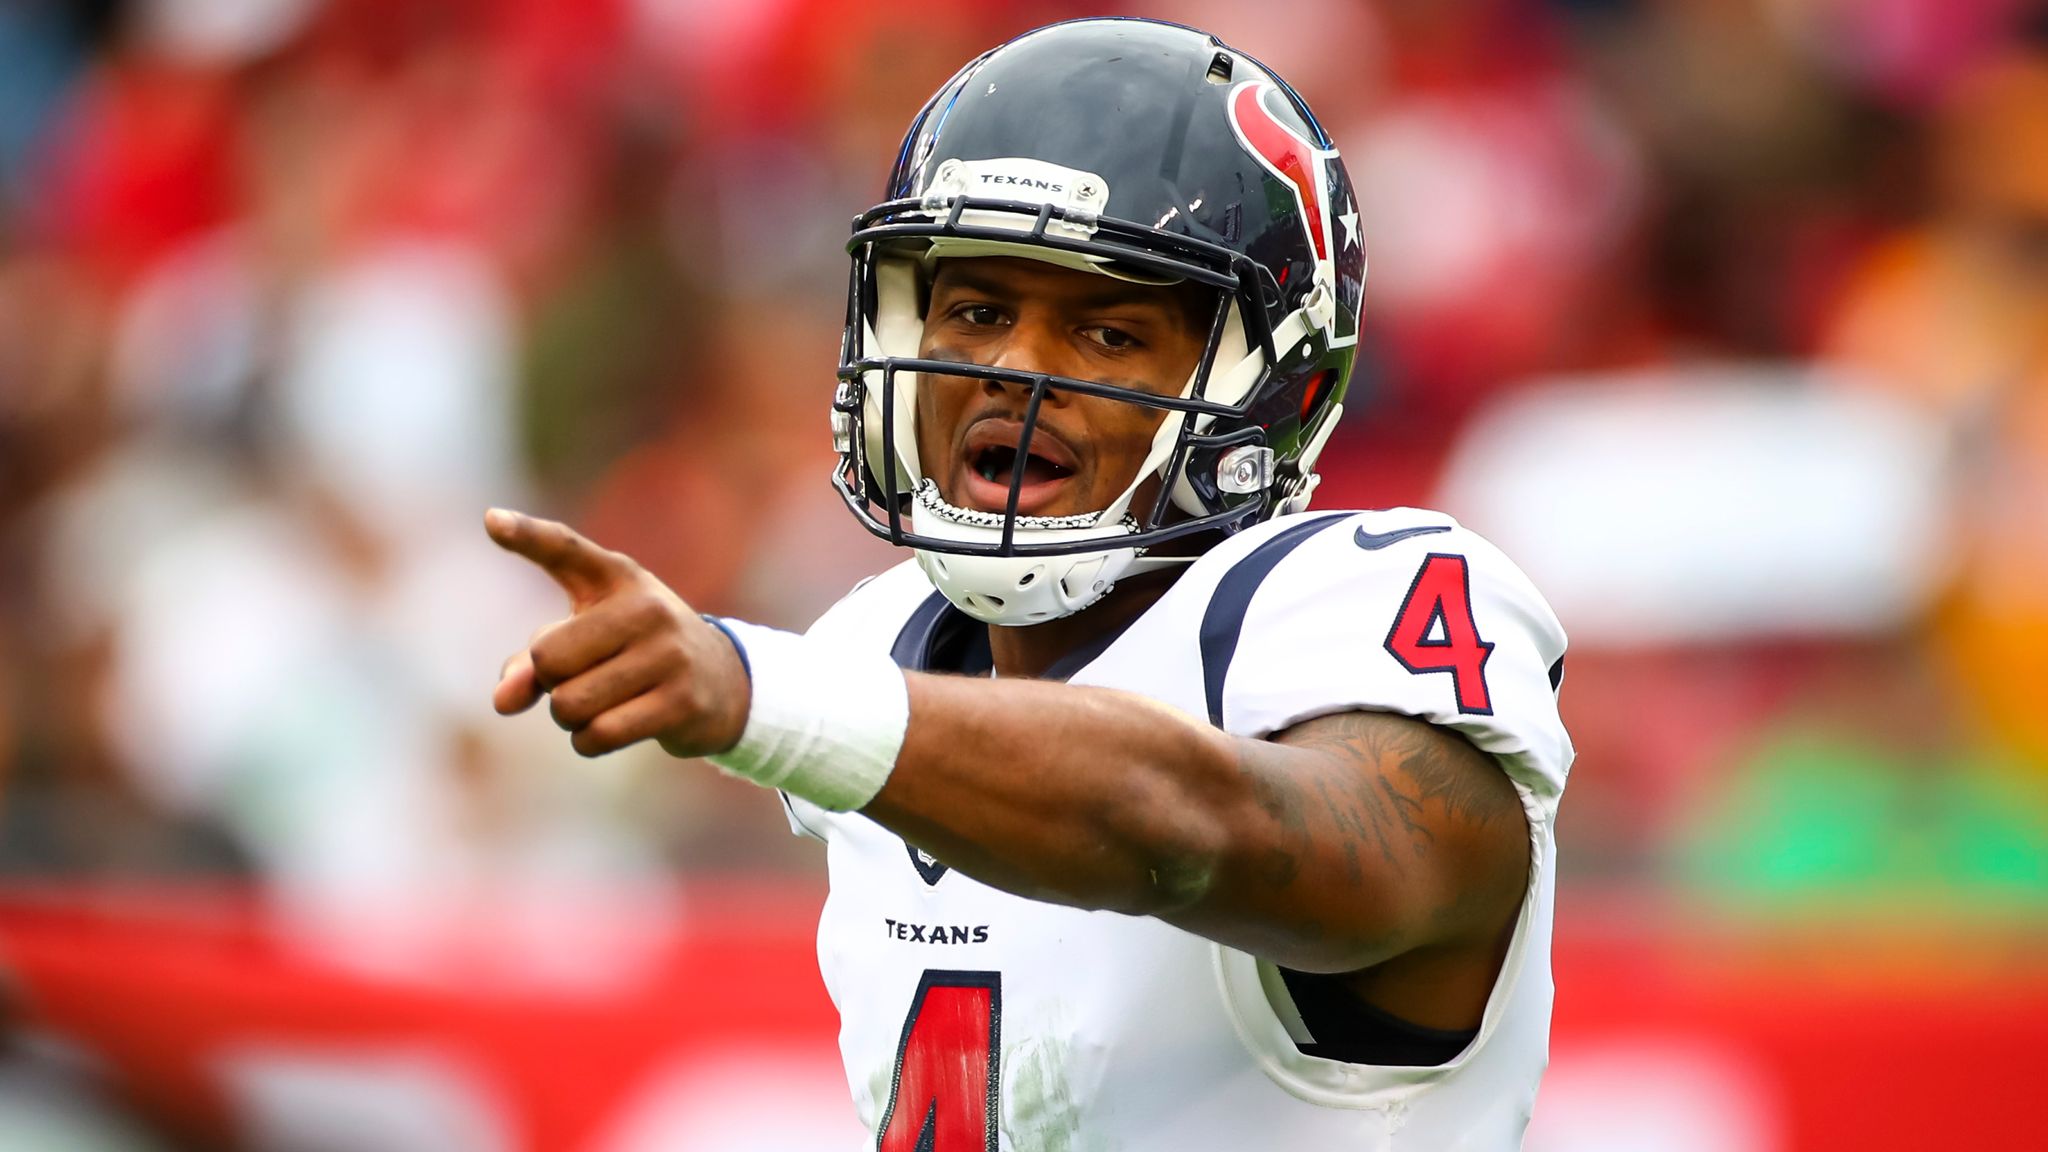 Deshaun Watson reacts to clinching AFC South with win over Bucs